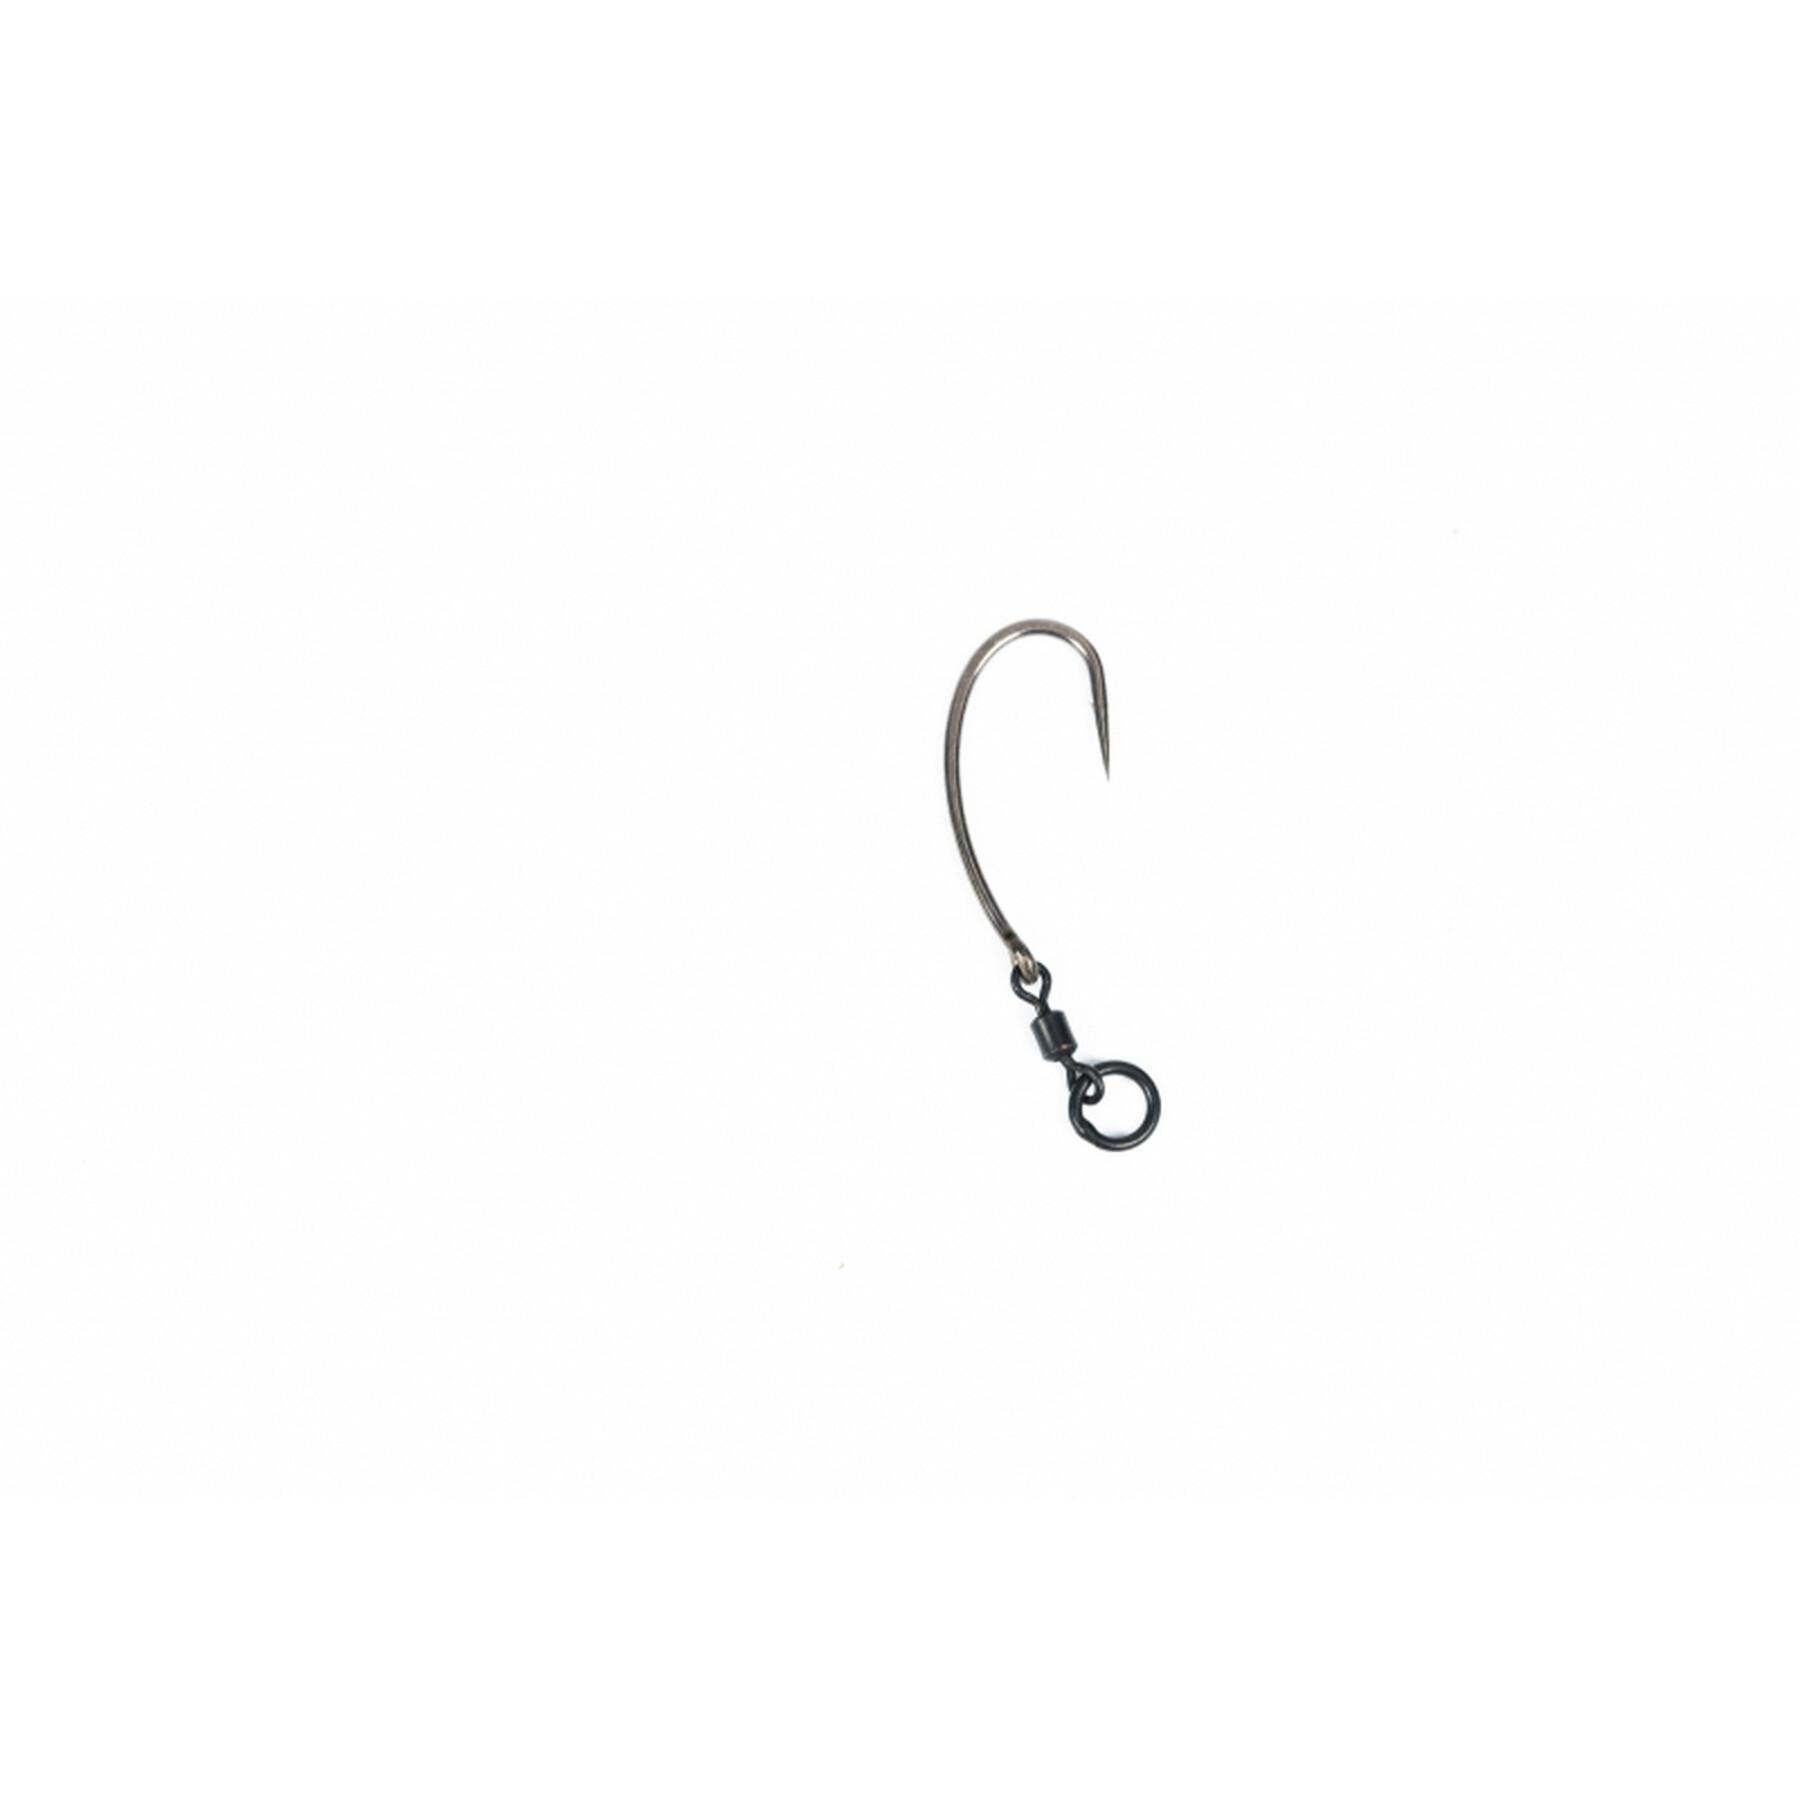 Hameçon Pinpoint Fang Gyro taille 8 Micro Barbed